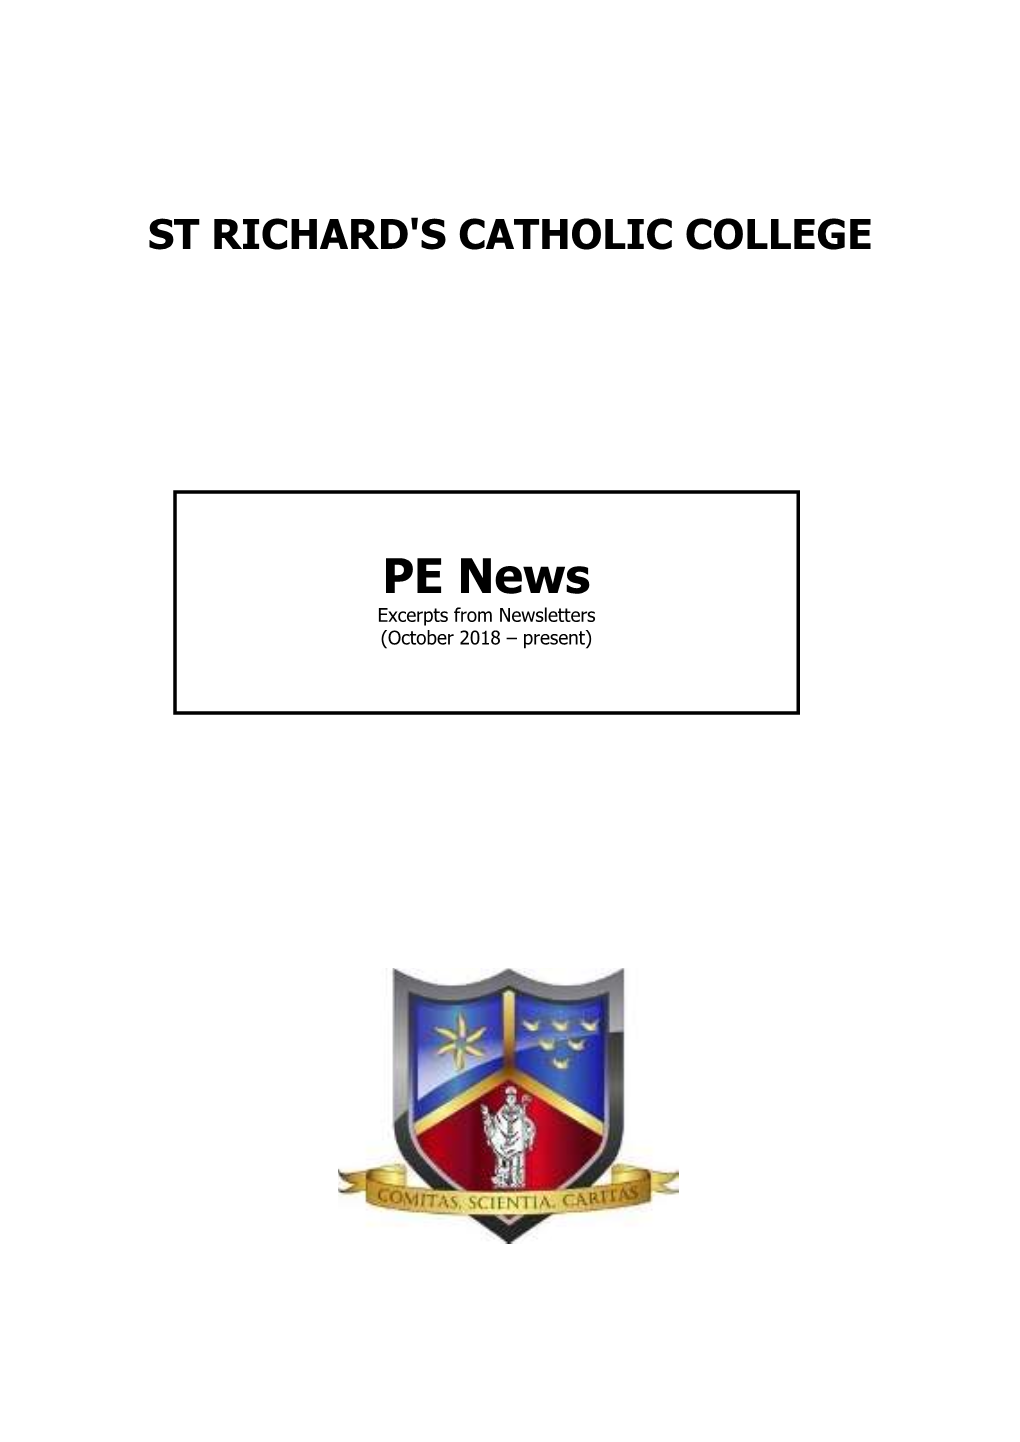 PE News Excerpts from Newsletters (October 2018 – Present)